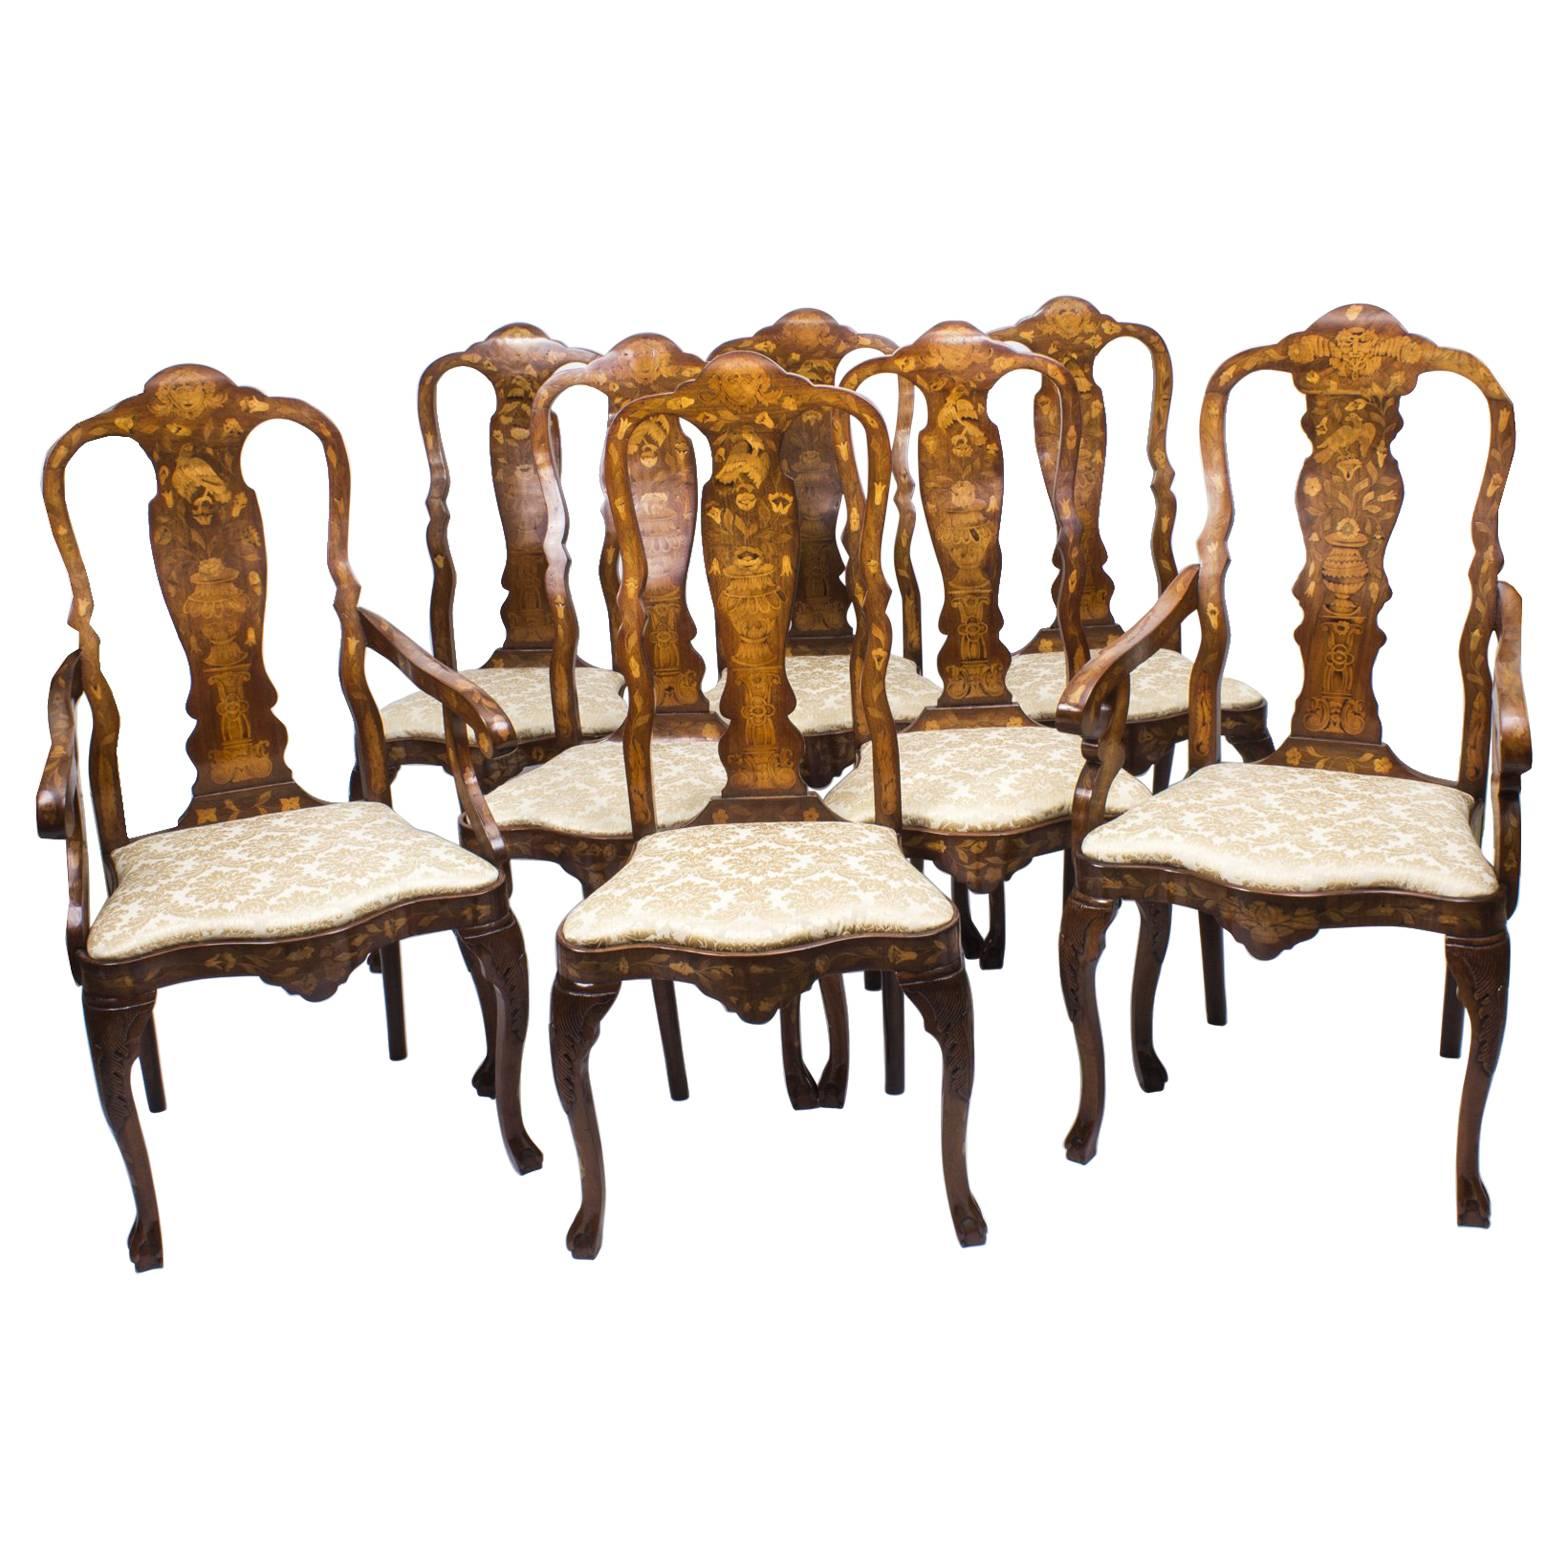 Antique Set of Eight Dutch Marquetry Walnut Dining Chairs, 18th Century